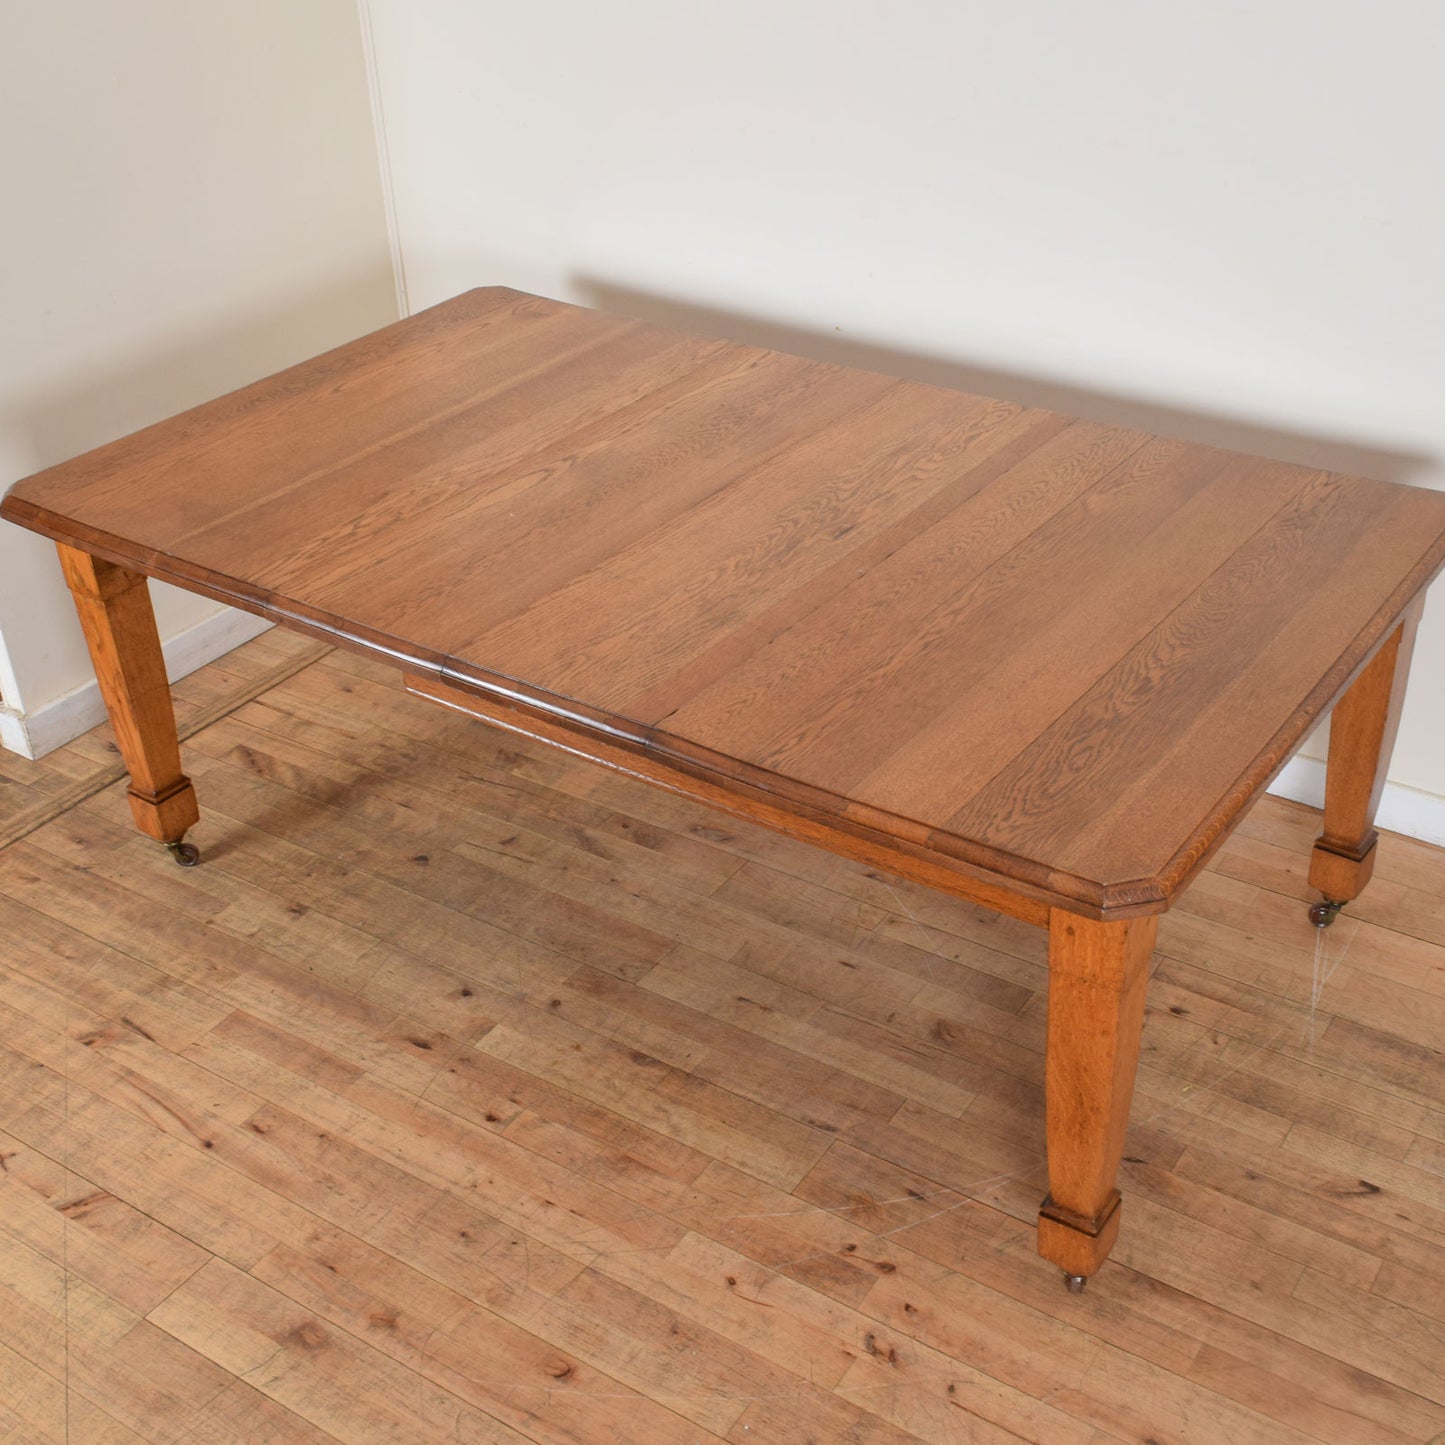 Extending Draw Leaf Table with Six Chairs